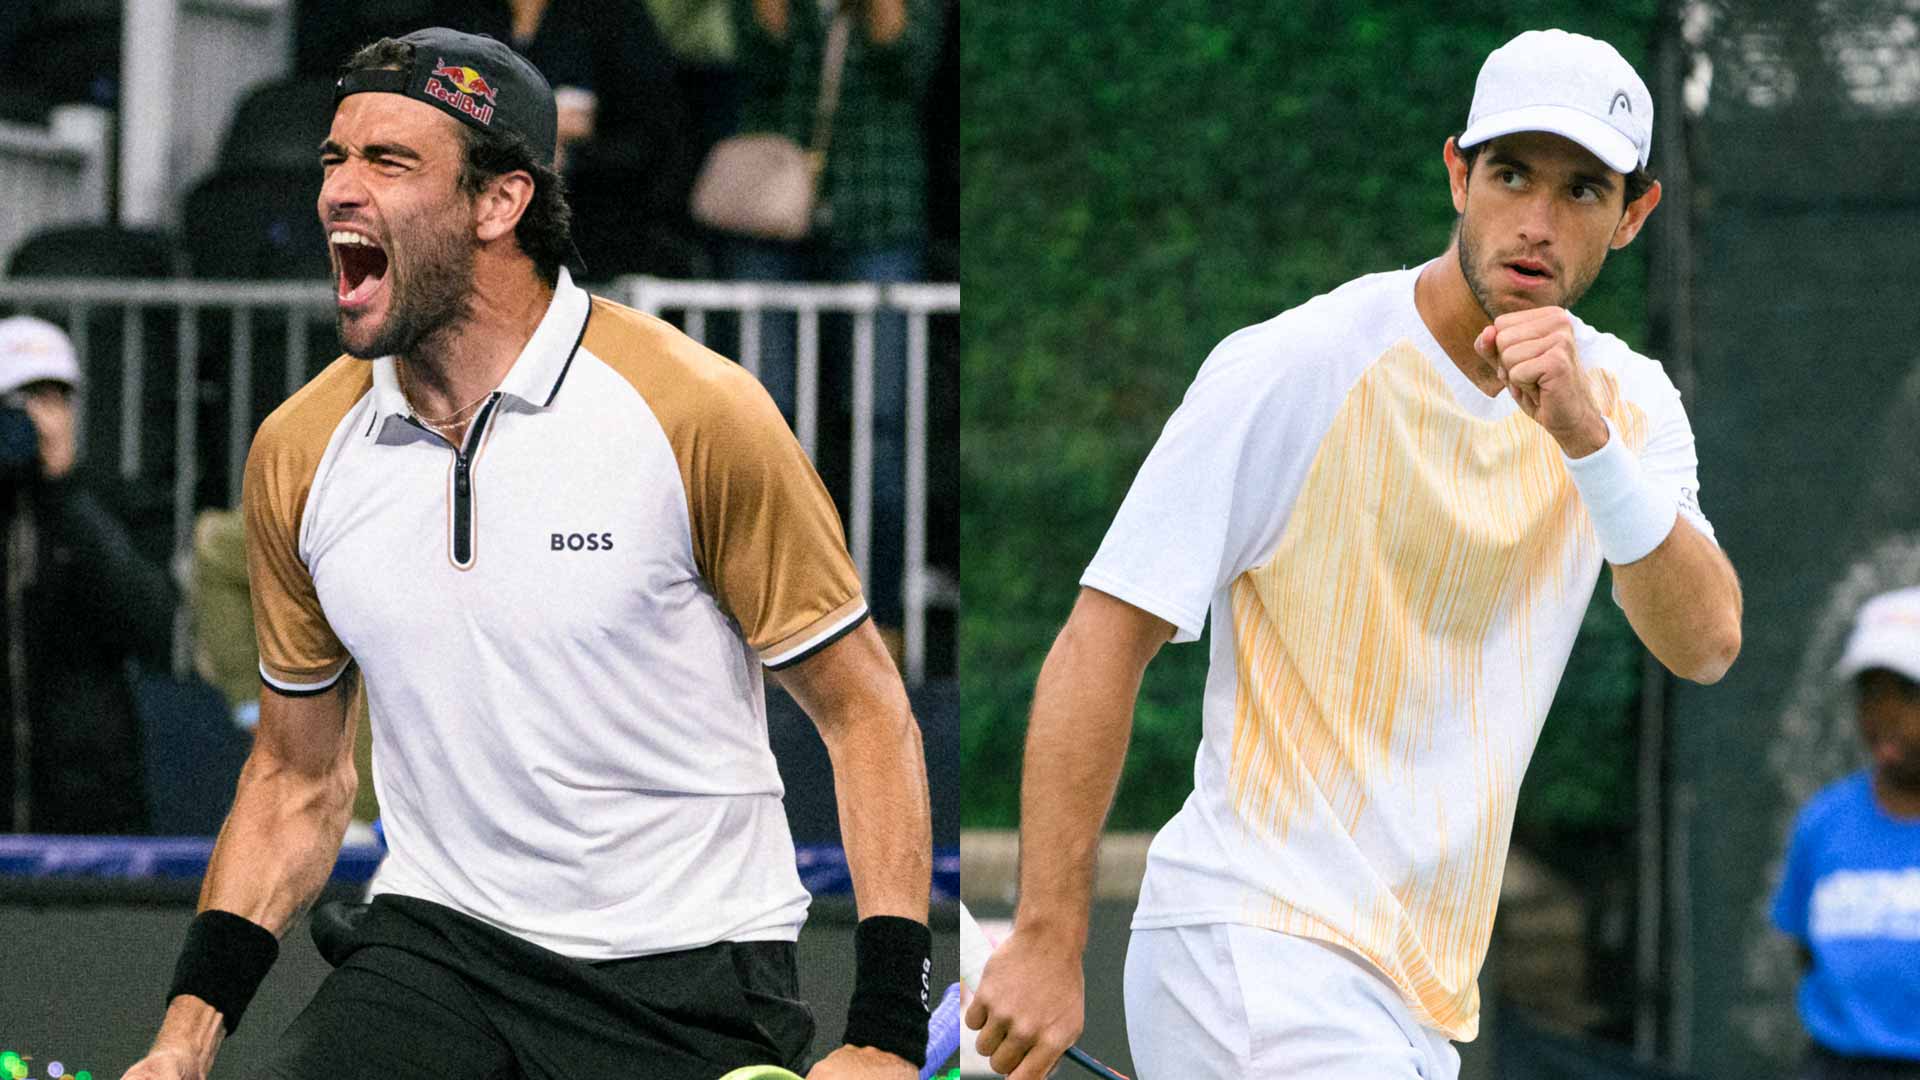 Matteo Berrettini and Nuno Borges have not played each other before.